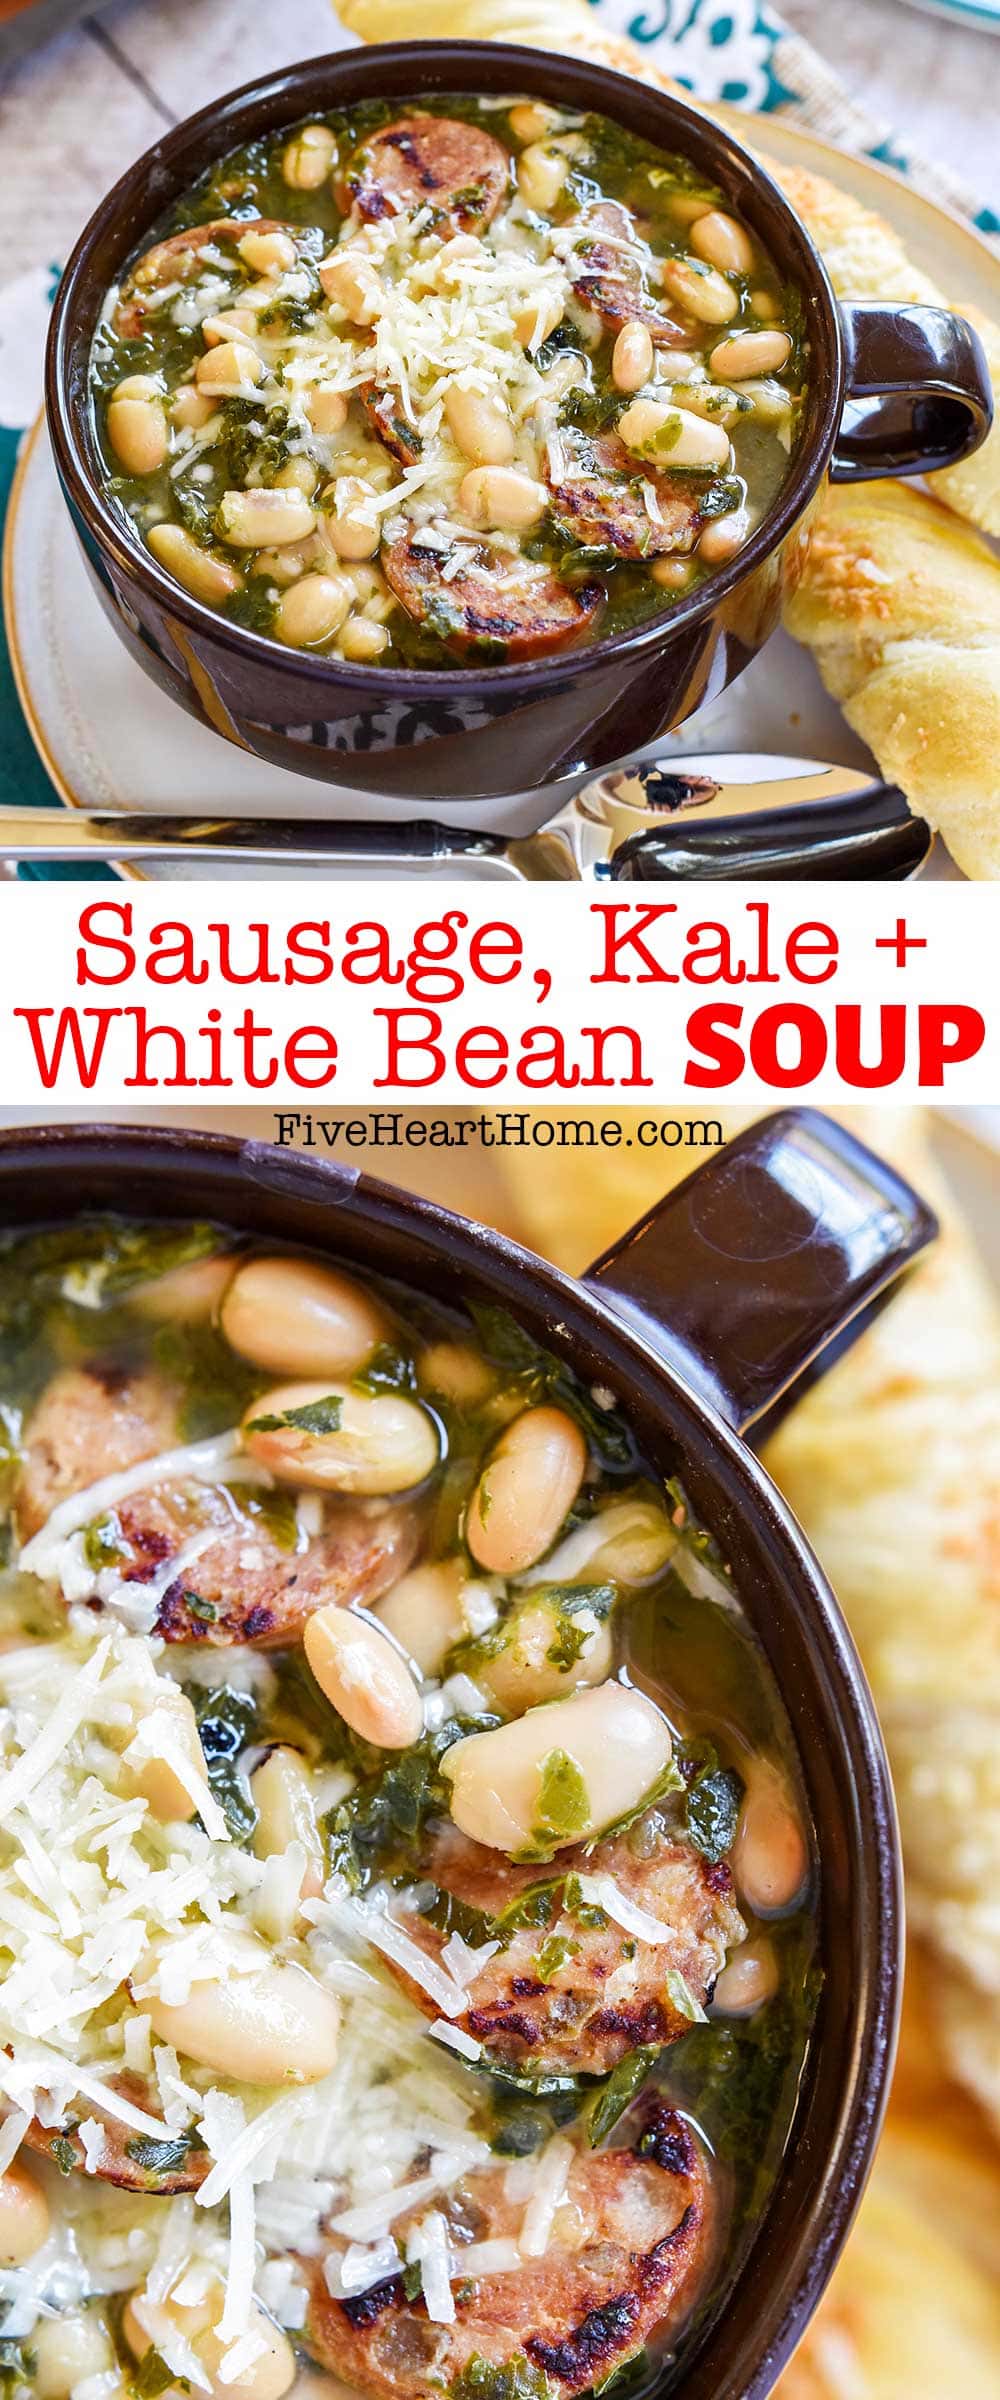 Sausage Kale White Bean Soup ~ a hearty, wholesome, cozy recipe that's full of flavor, loaded with vitamins, and easy to make in under 30 minutes! | FiveHeartHome.com via @fivehearthome